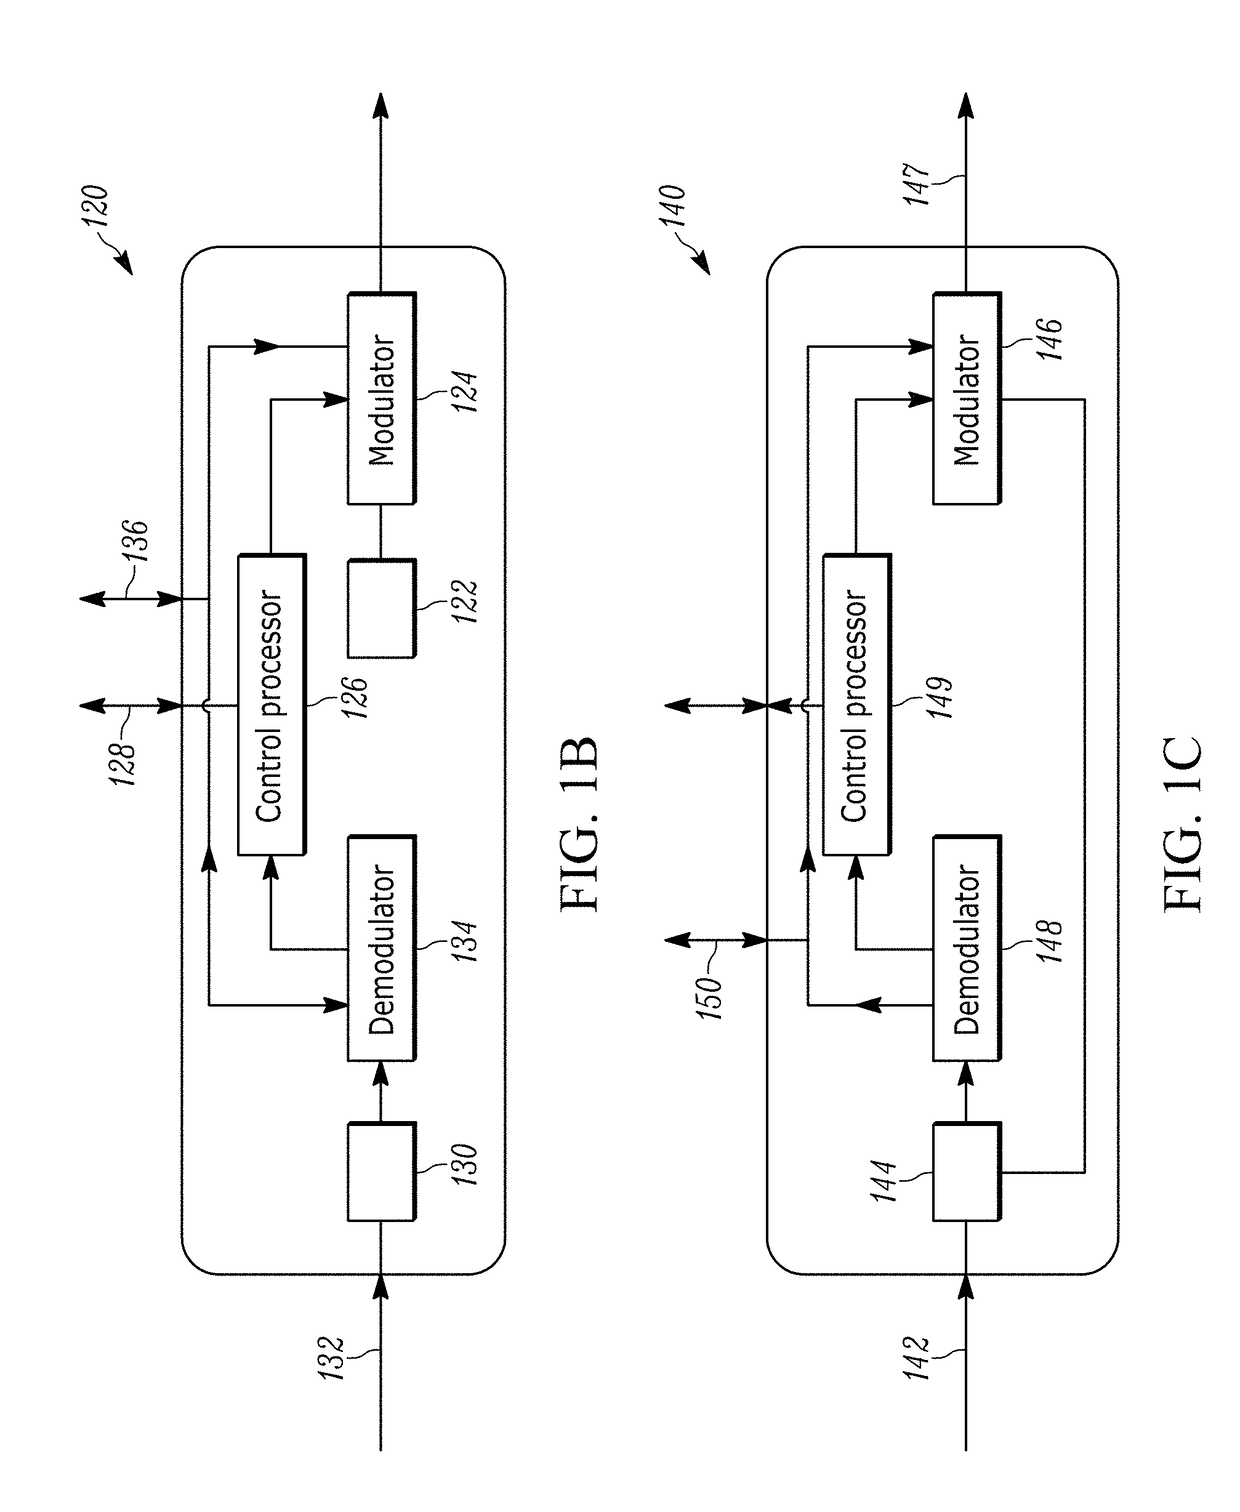 Method and Apparatus for Hardware-Configured Network